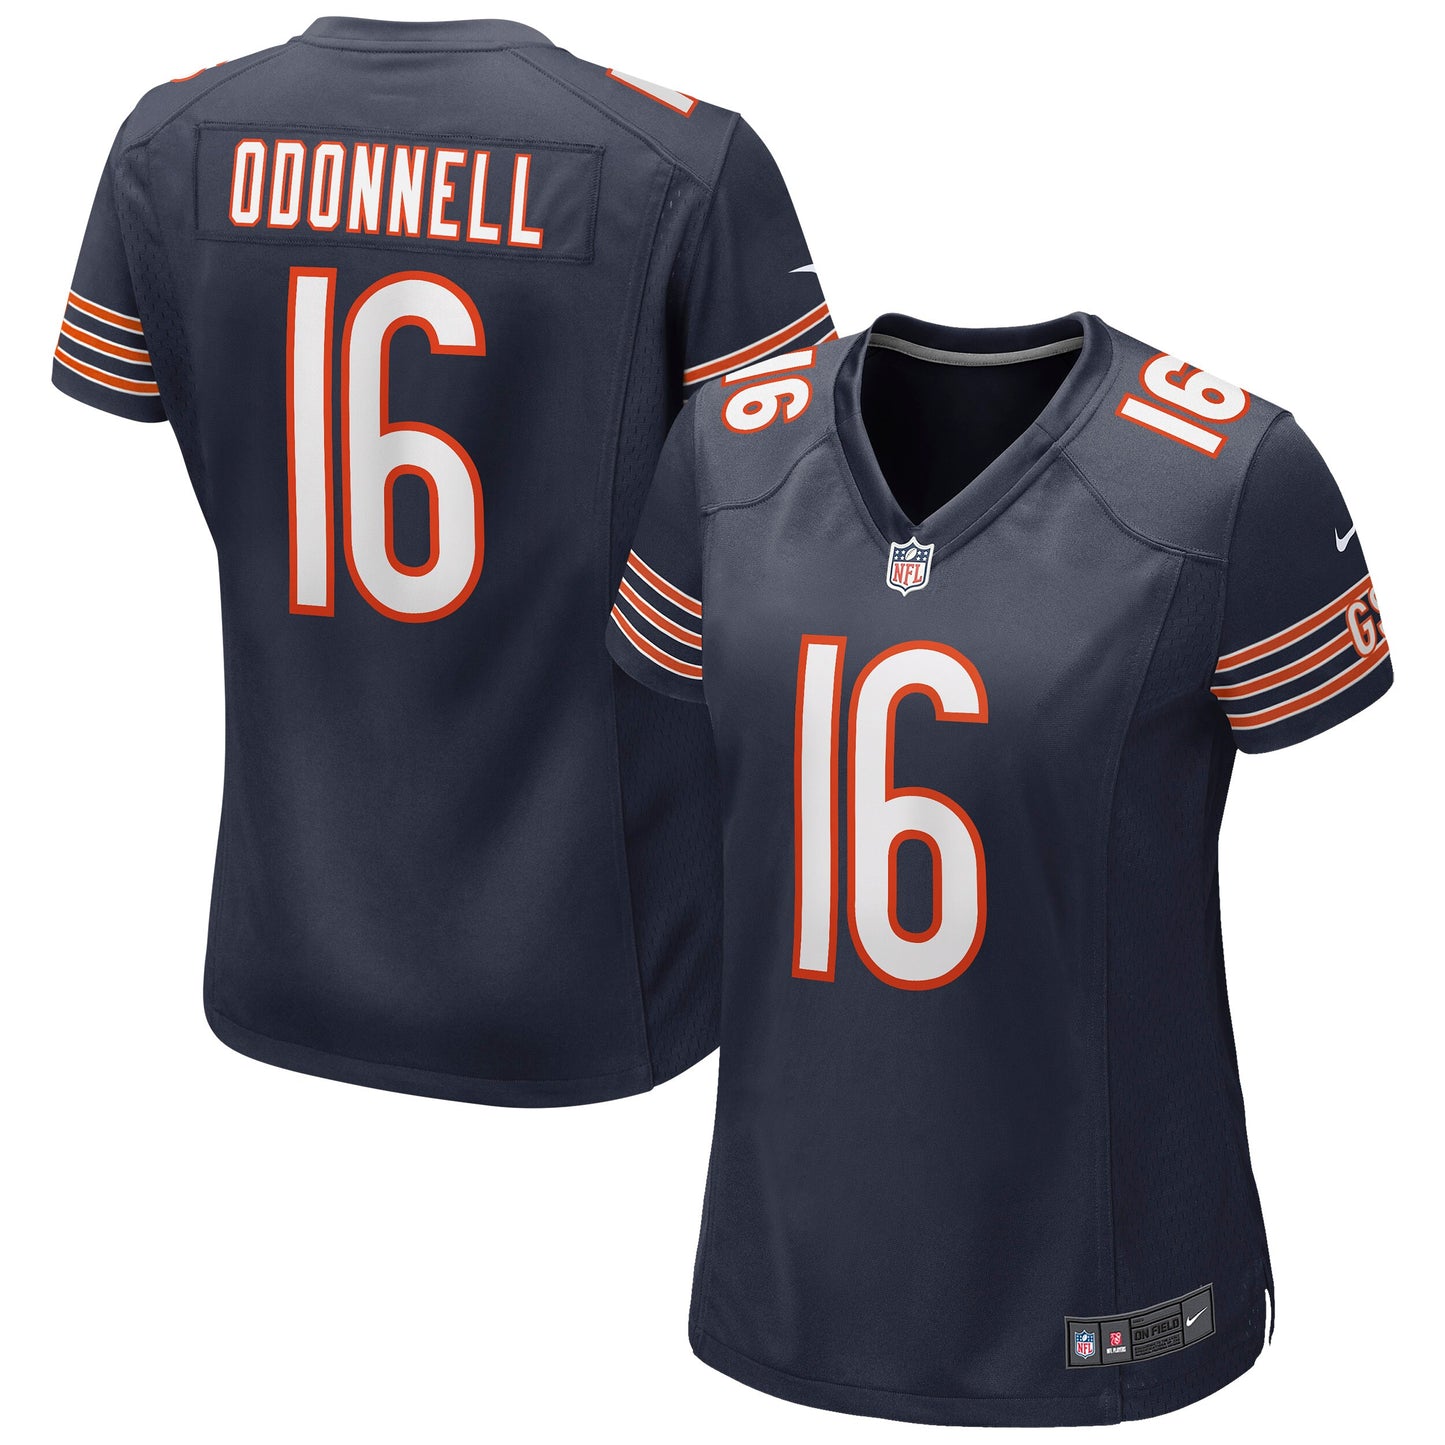 Pat O'Donnell Chicago Bears Nike Women's Game Jersey - Navy